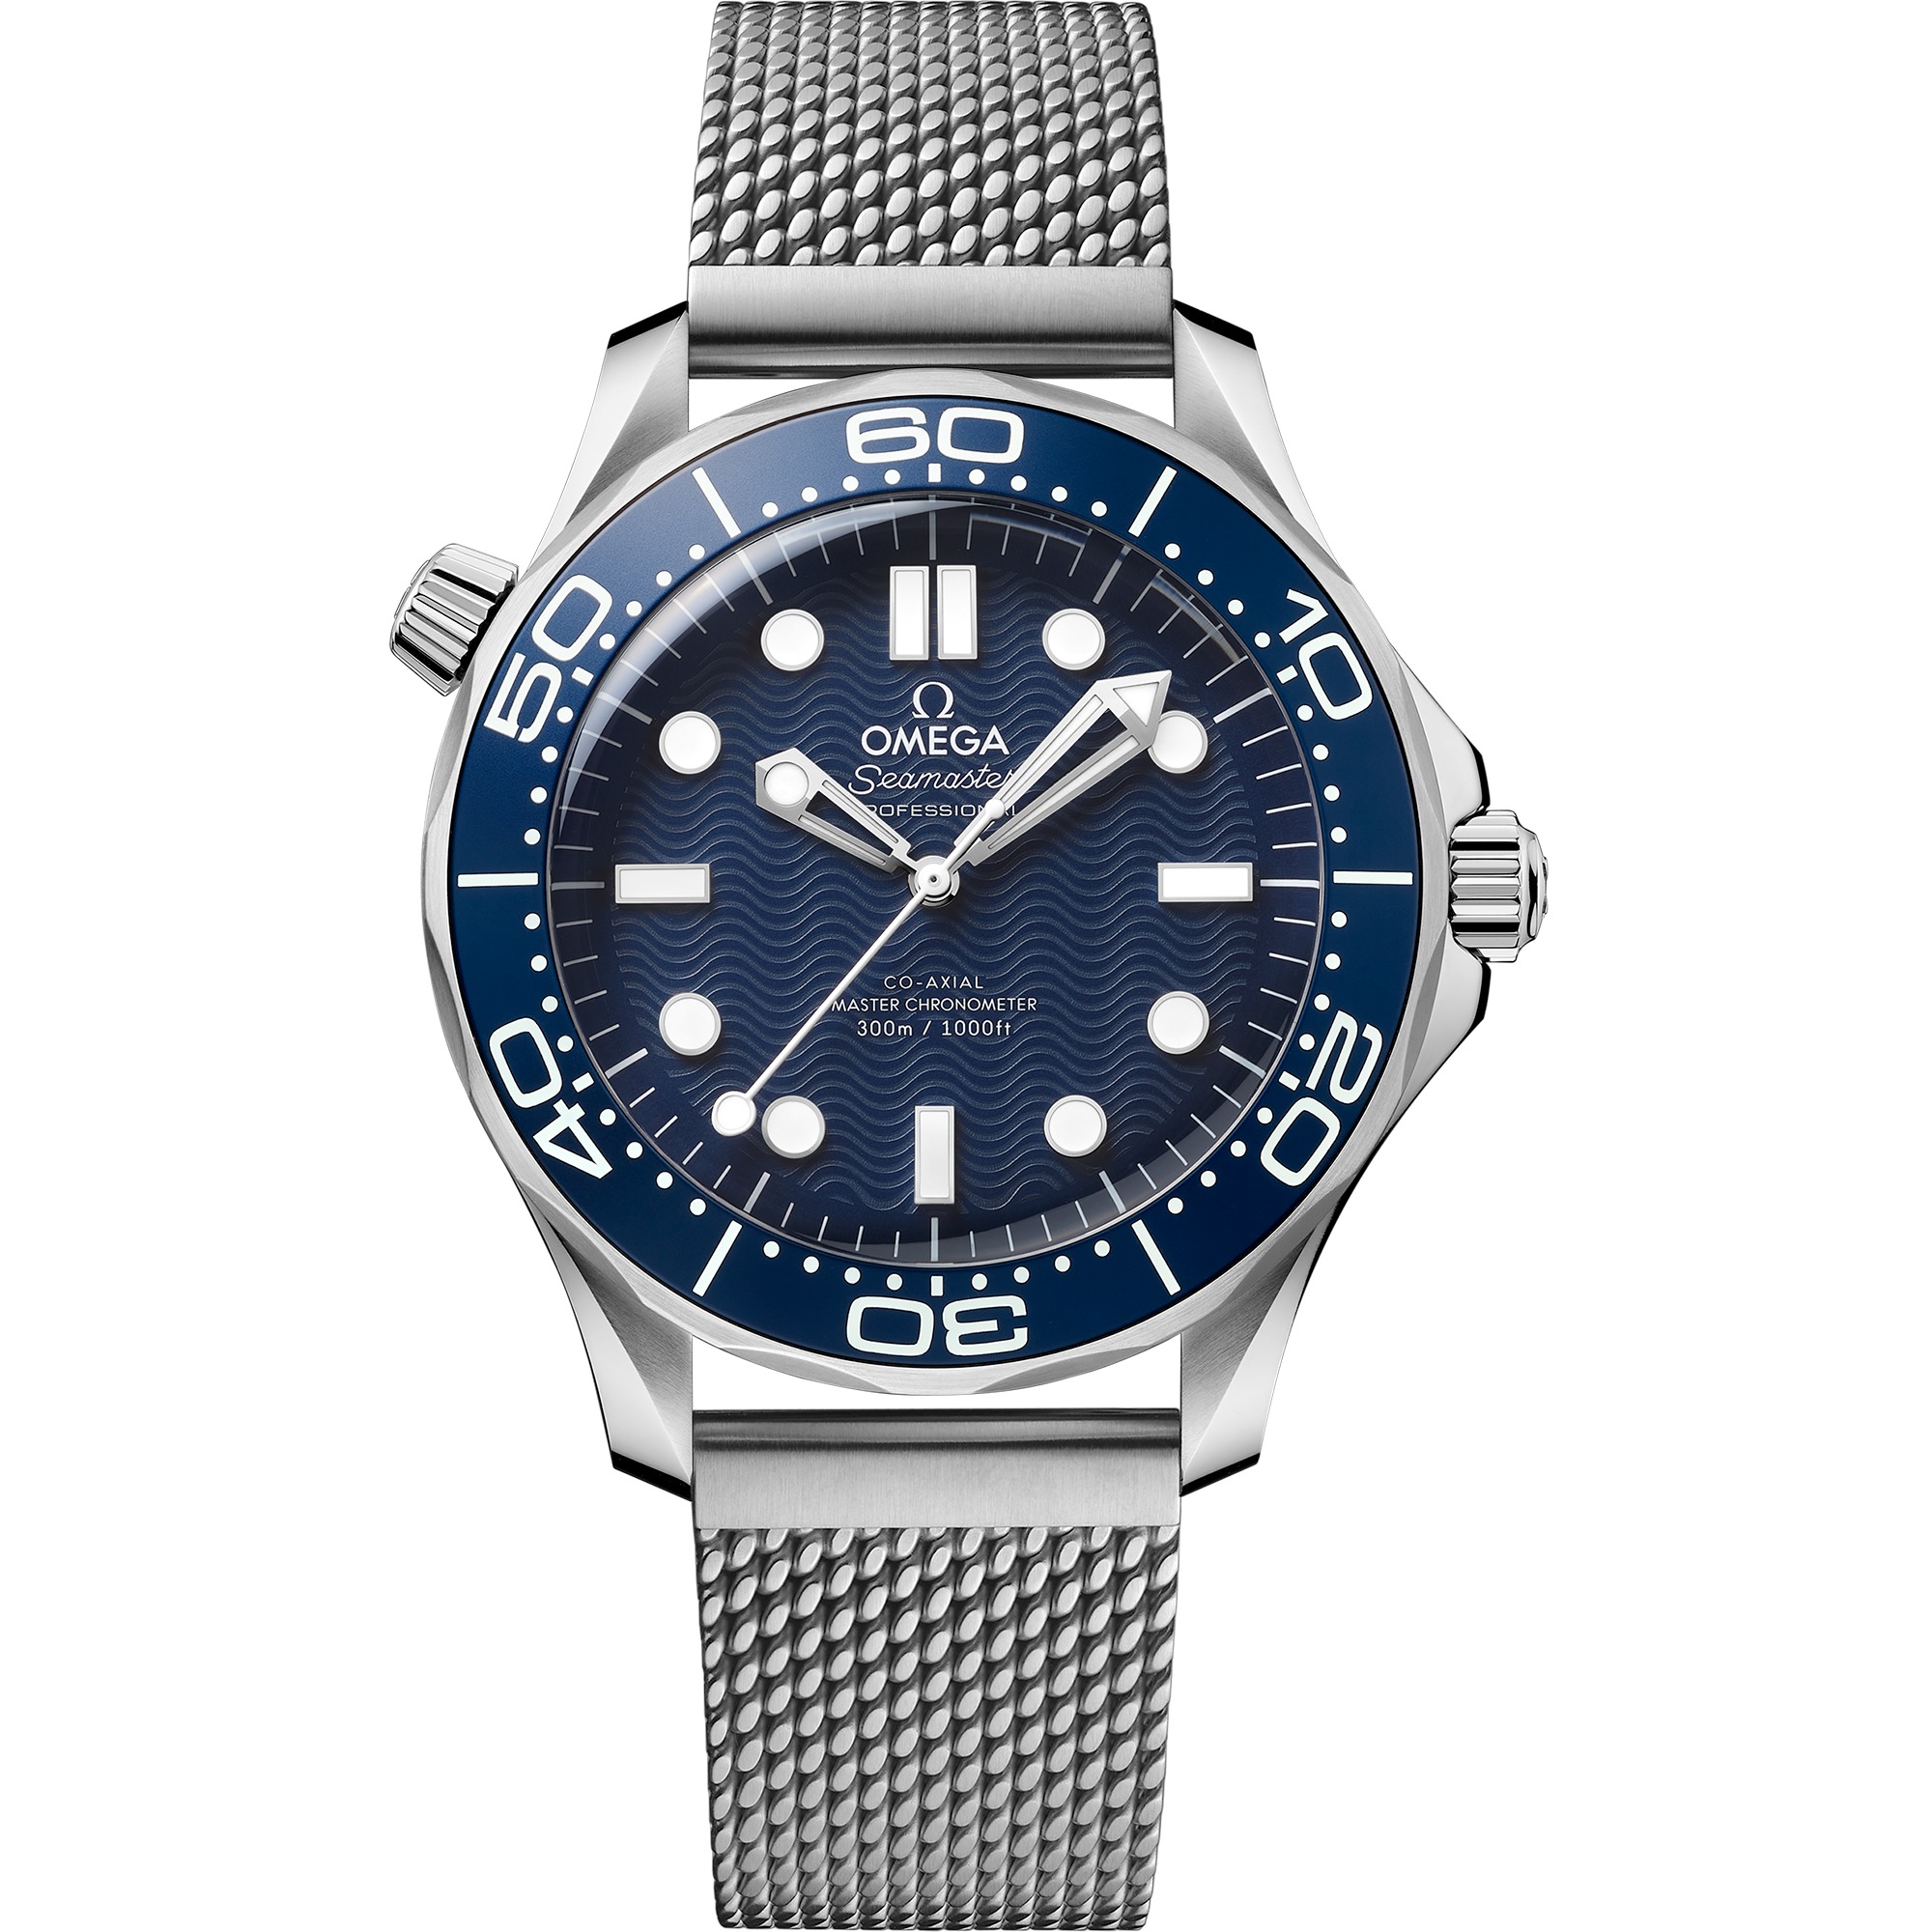 https://www.omegawatches.com/media/catalog/product/o/m/omega-seamaster-diver-300m-co-axial-master-chronometer-42-mm-21030422003002-413ac2.png?w=700